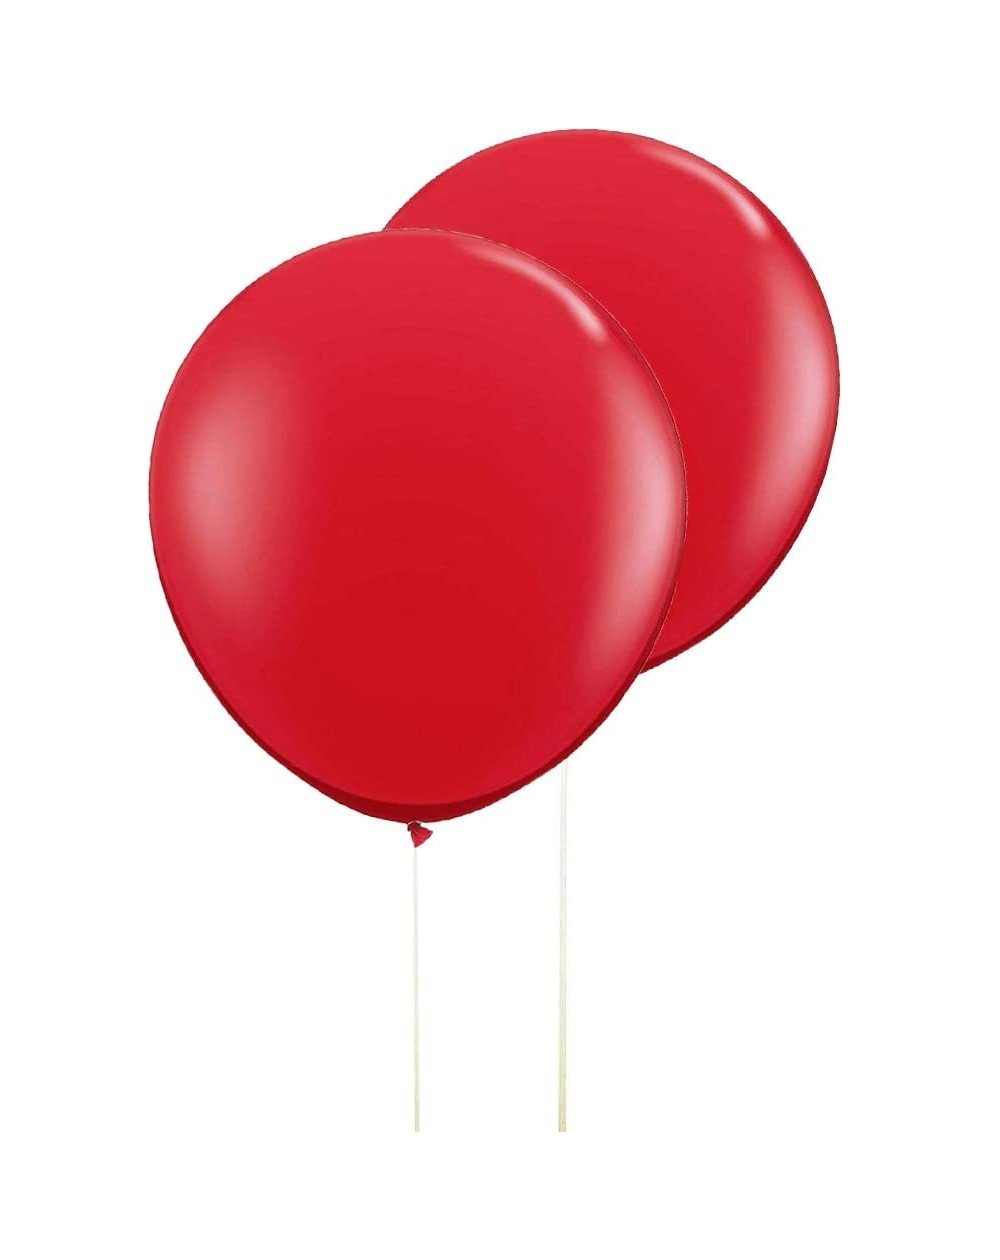 Balloons Red Balloon 36 inch Big Latex Balloons for Party Decoration (Red- 10 Pcs) - Red - CM199S4ZAY0 $17.75